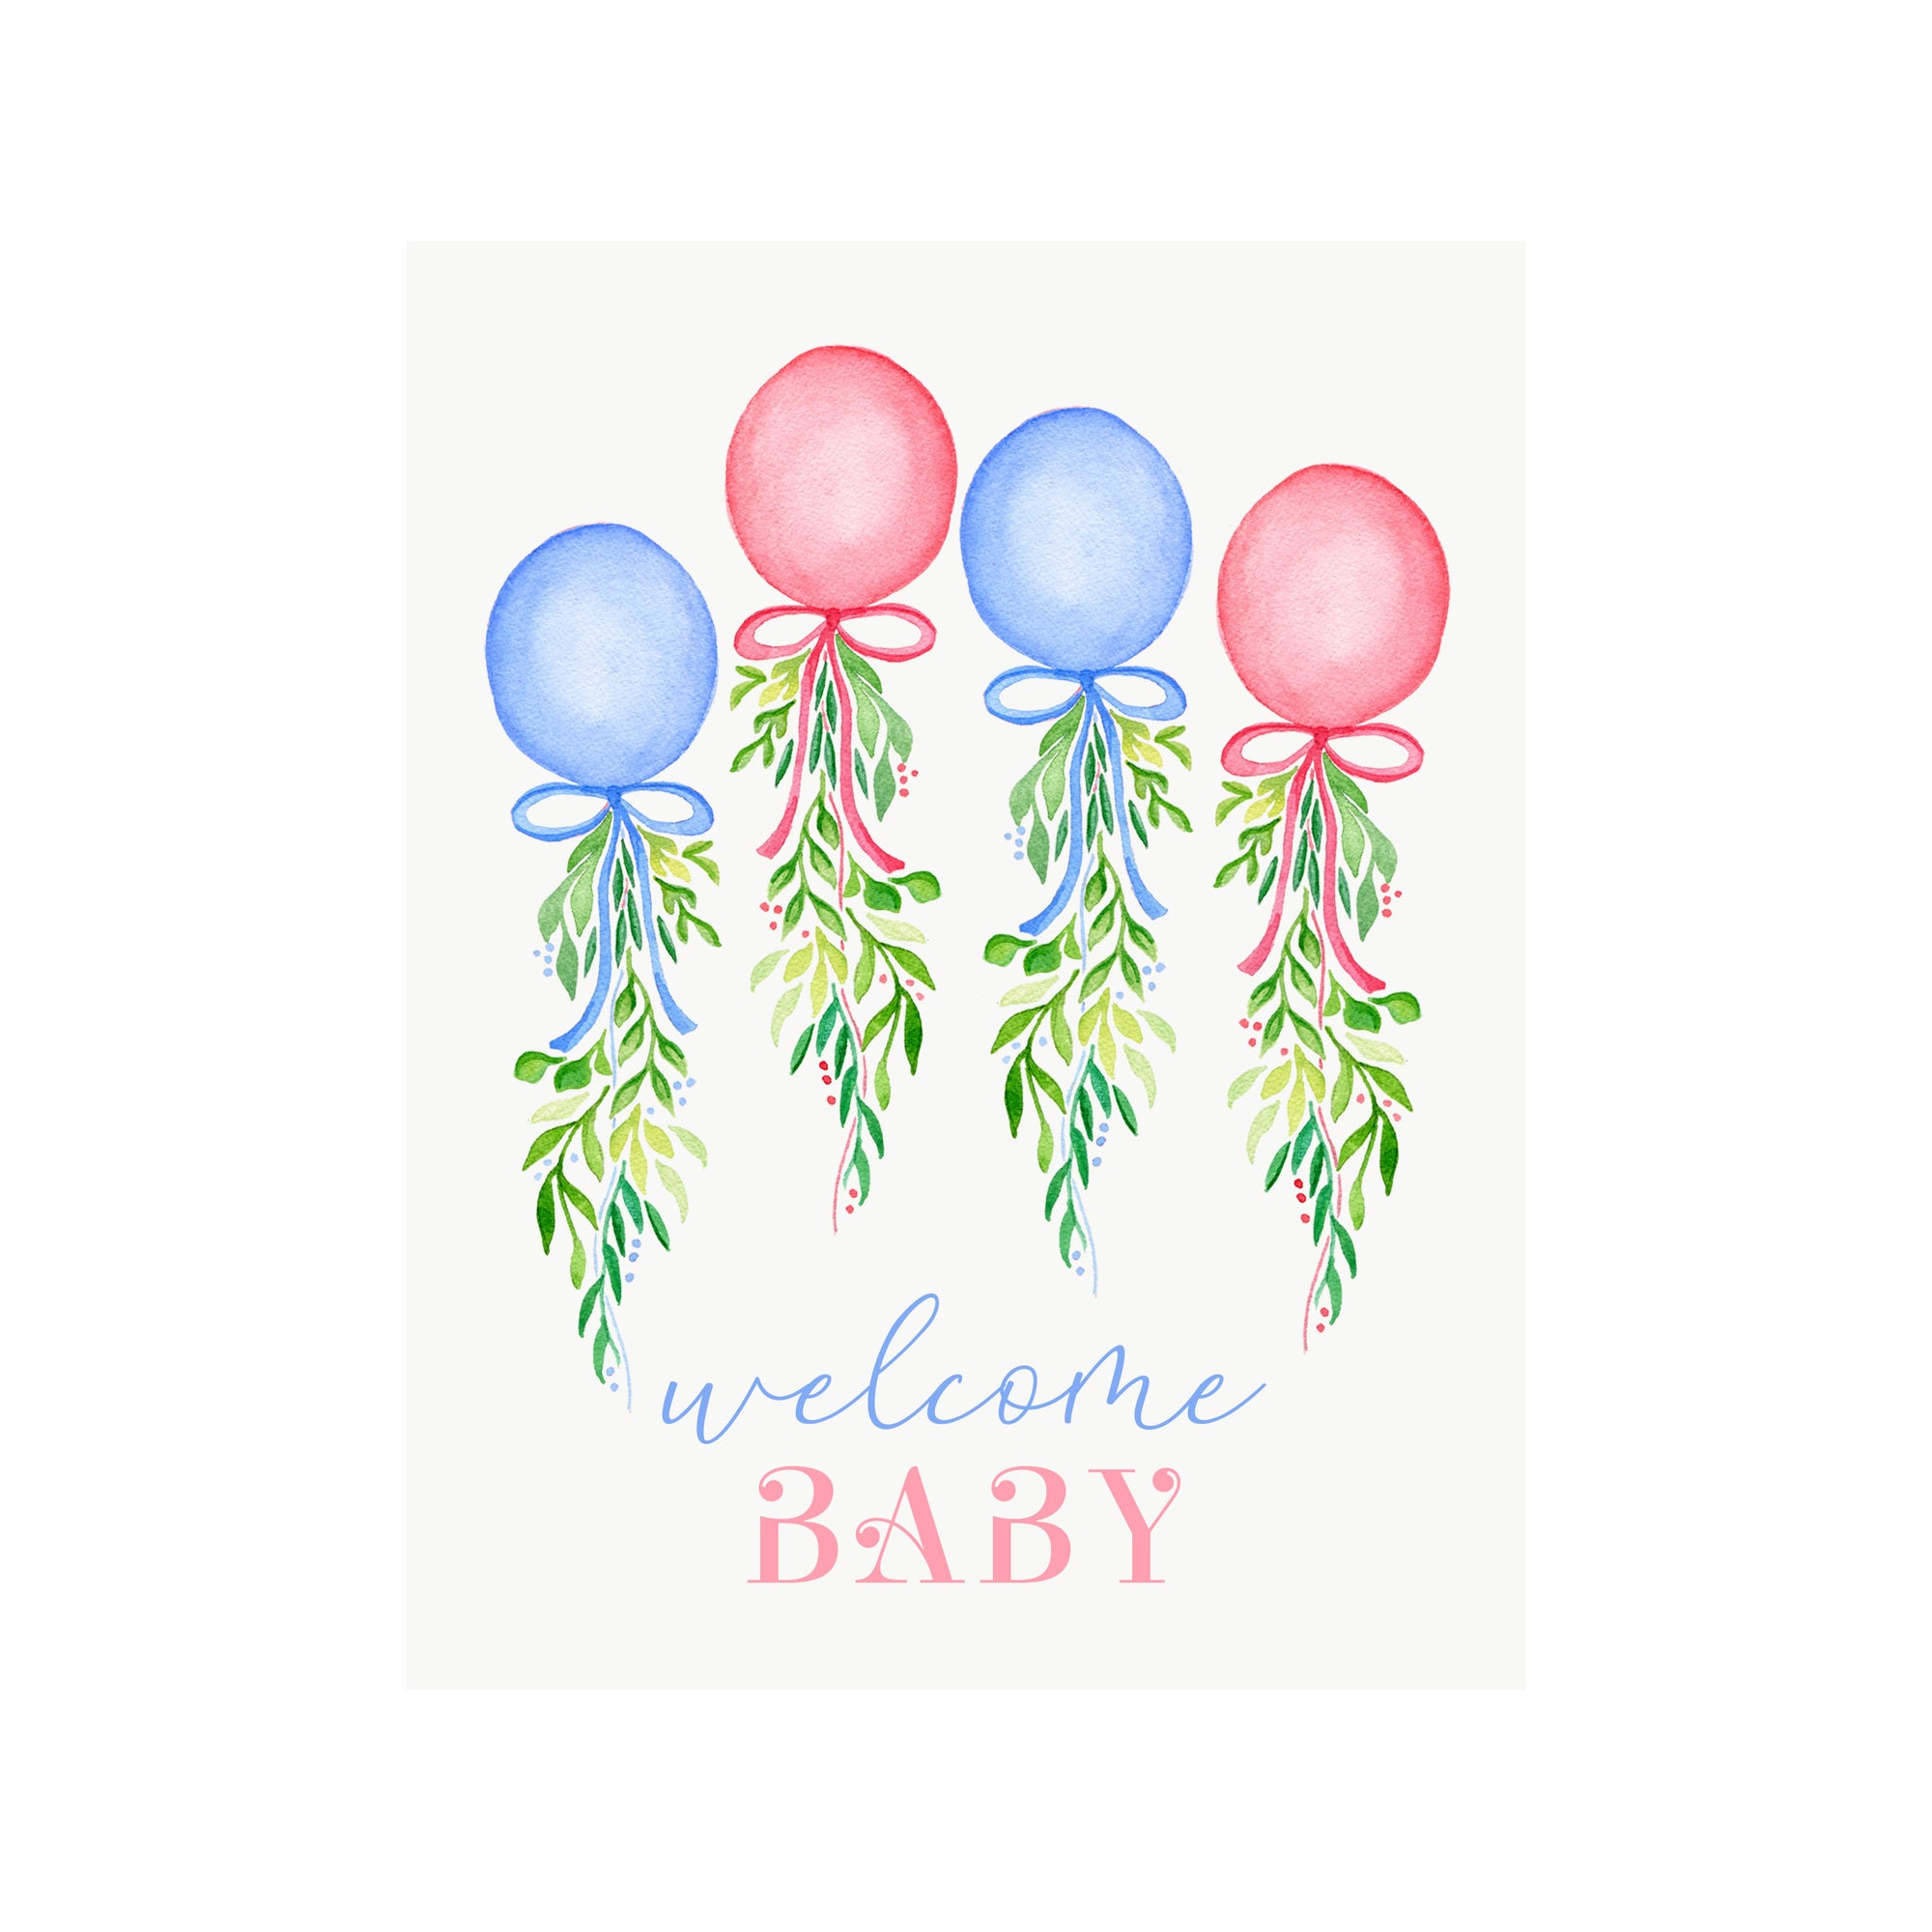 Welcome Baby Balloons Card